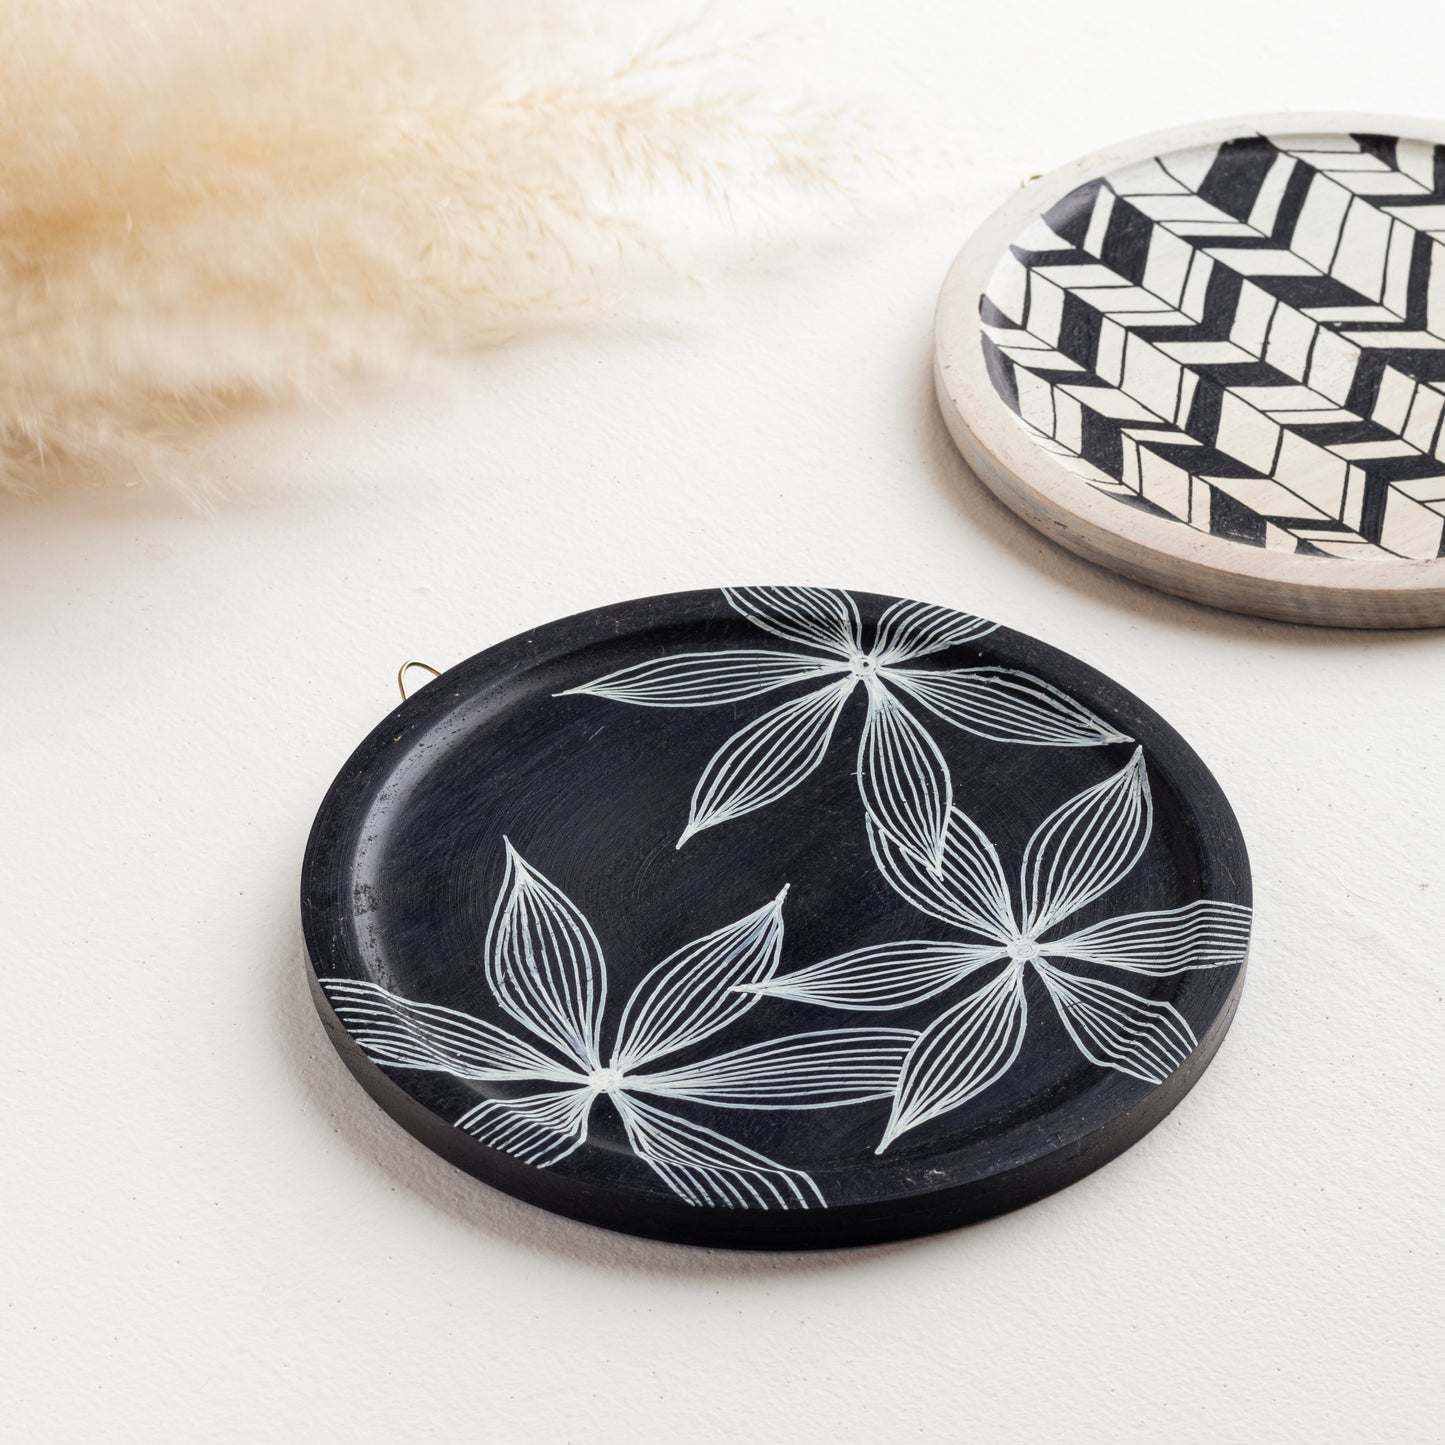 Daksh Wall Plates Decor Hanging for Home | Hand Painted Solid Wood Round Plates | Set of 2